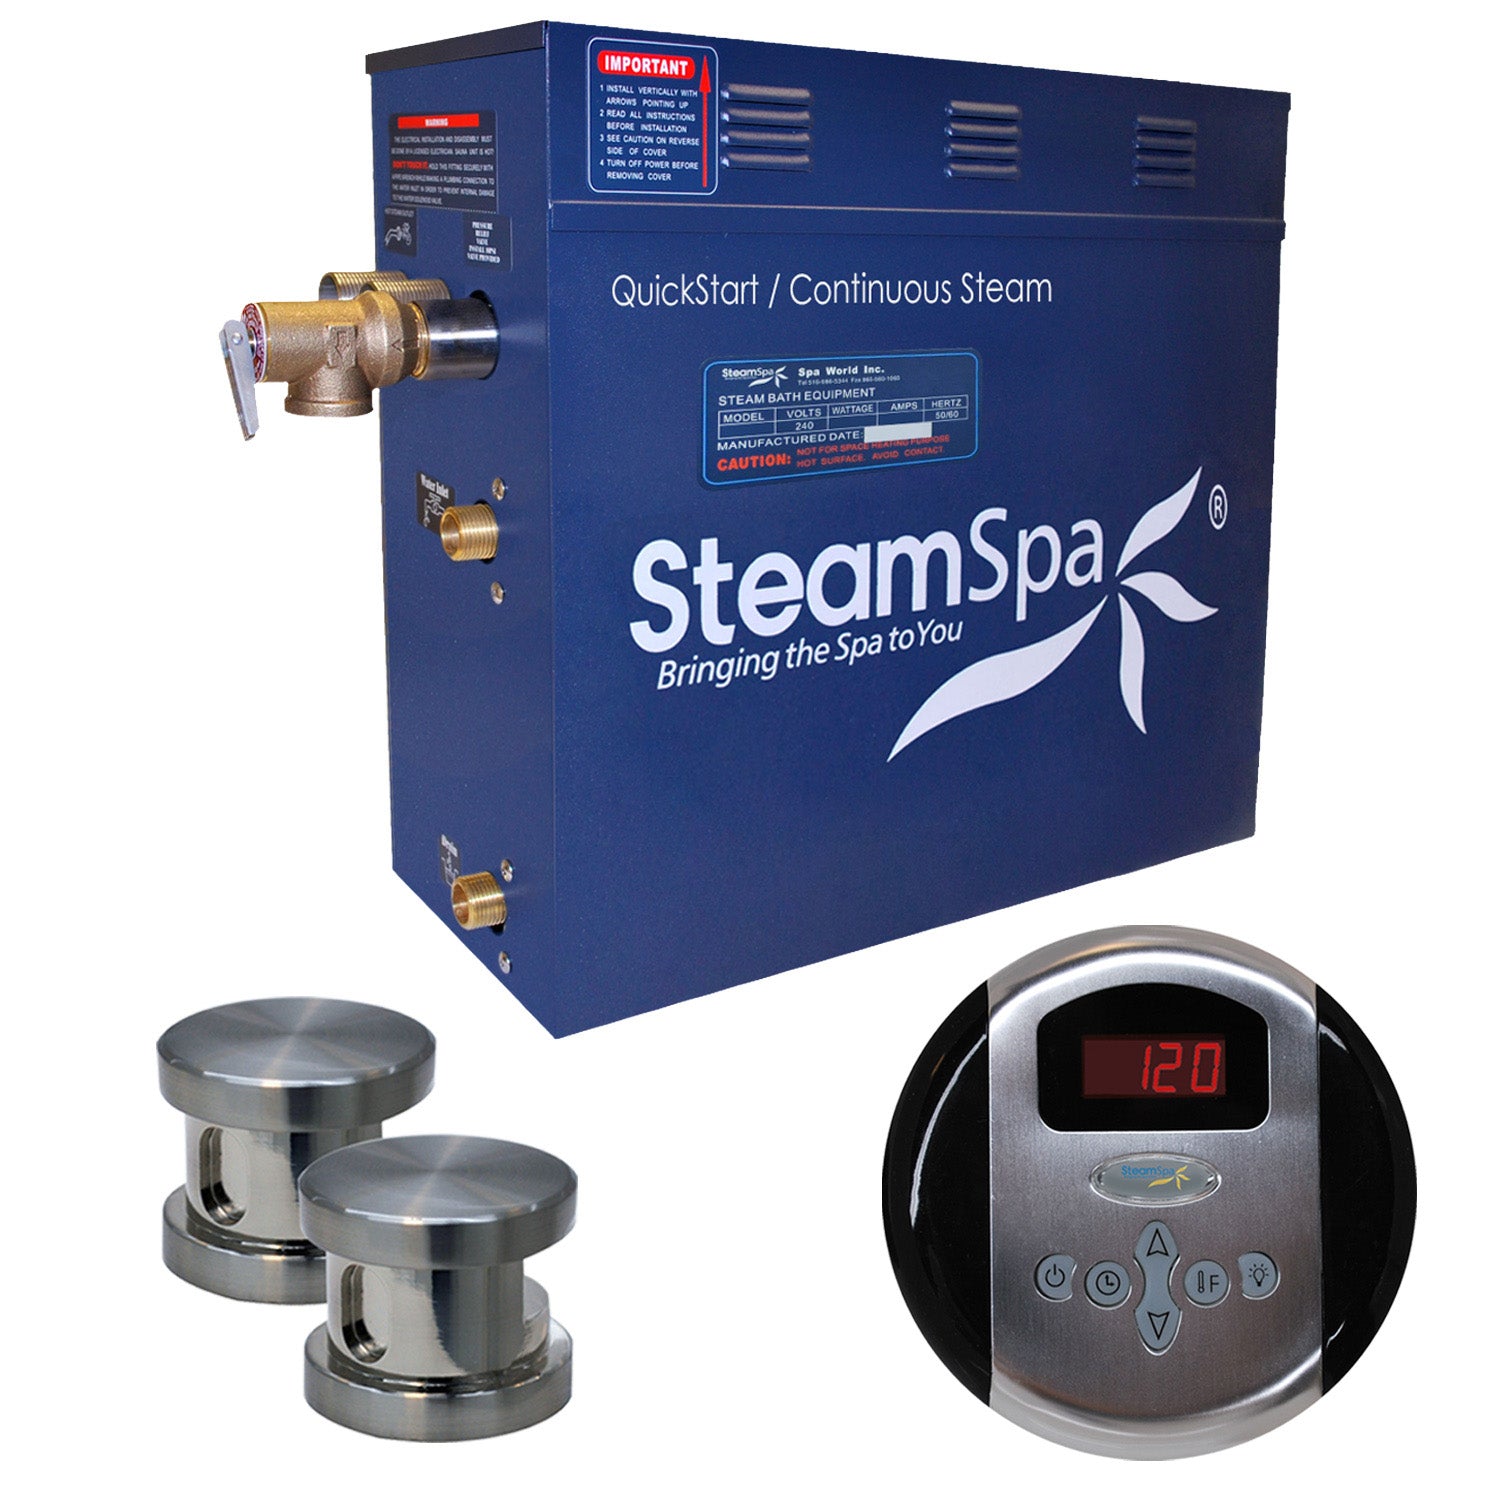 SteamSpa Oasis 9 KW QuickStart Acu-Steam Bath Generator Package - 16 in. L x 6.5 in. W x 14.5 in. H - Stainless Steel - Brushed Nickel Includes a 9kW QuickStart Acu-Steam Bath Generator, Control Panel, Two Steam heads, Pressure Relief Valve - OA900 - Vital Hydrotherapy